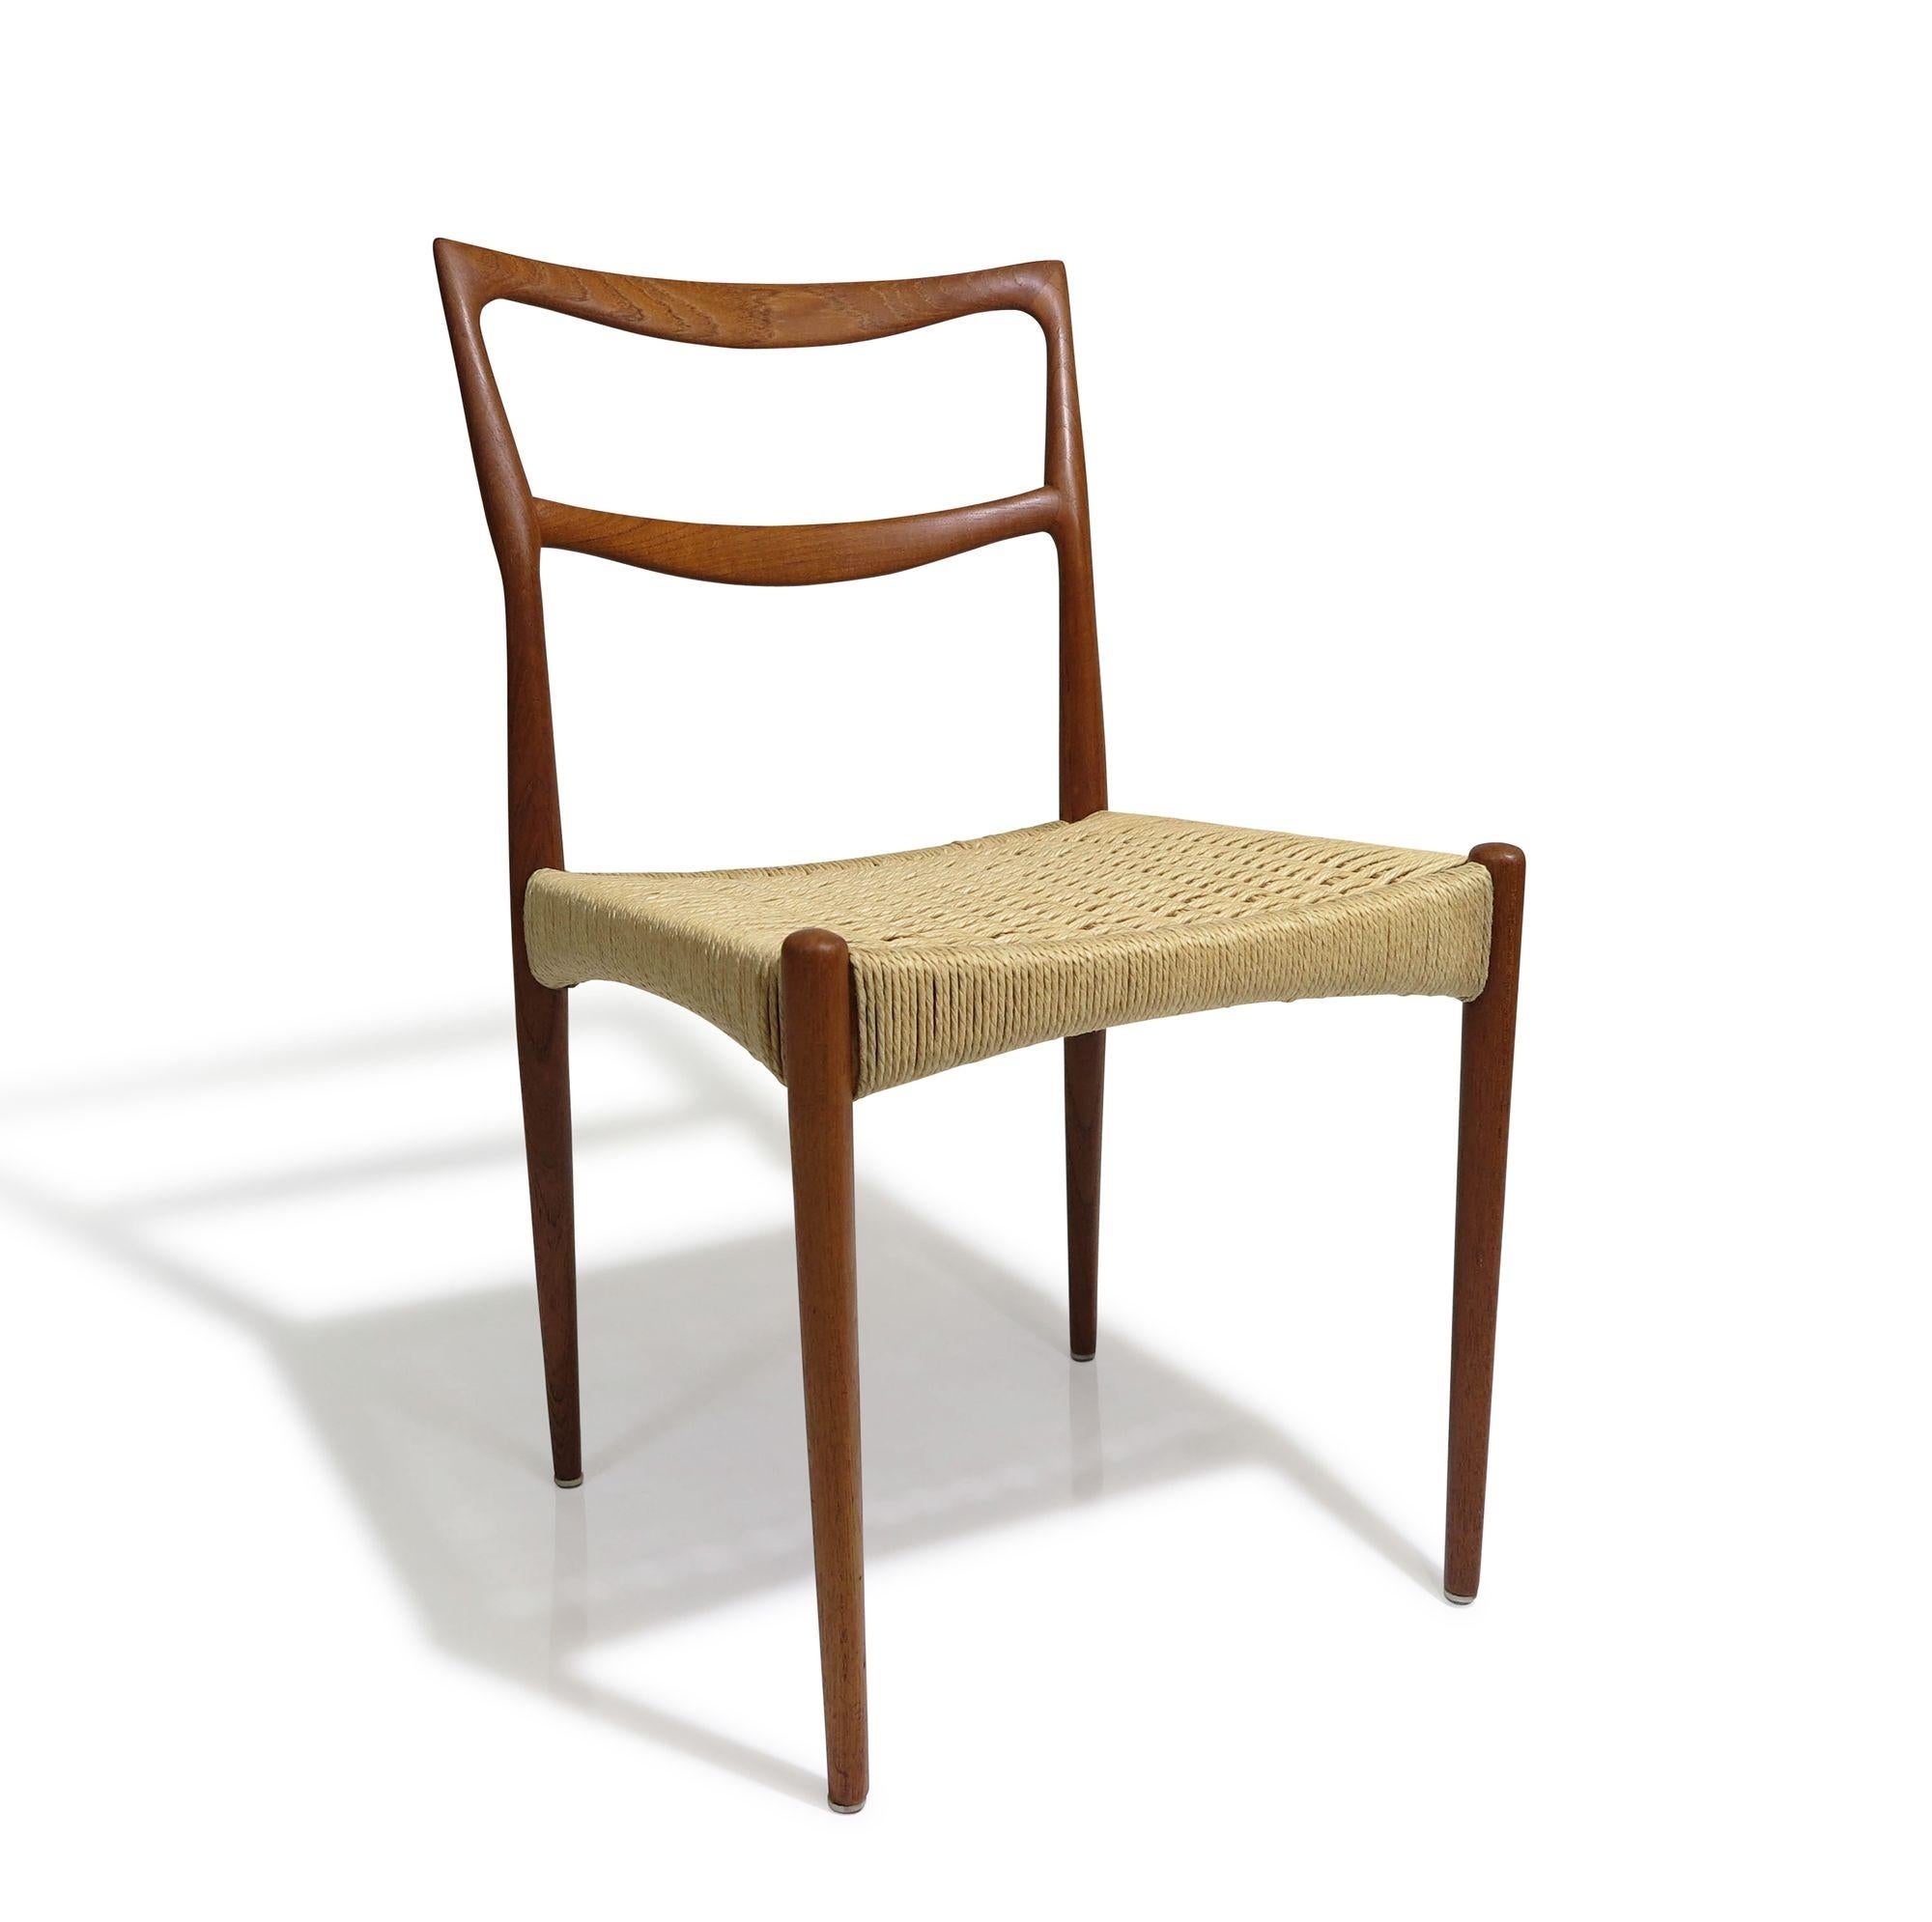 Elegant set of Scandinavian modern dining chairs by H.W. Klein for Bramin, Denmark, 1962. Finely sculpted of teak with woven paper cord seats. Model 223. Restored and in excellent condition.


Measurements
W 17,50'' x D 19,75'' x H 31''
Seat Height